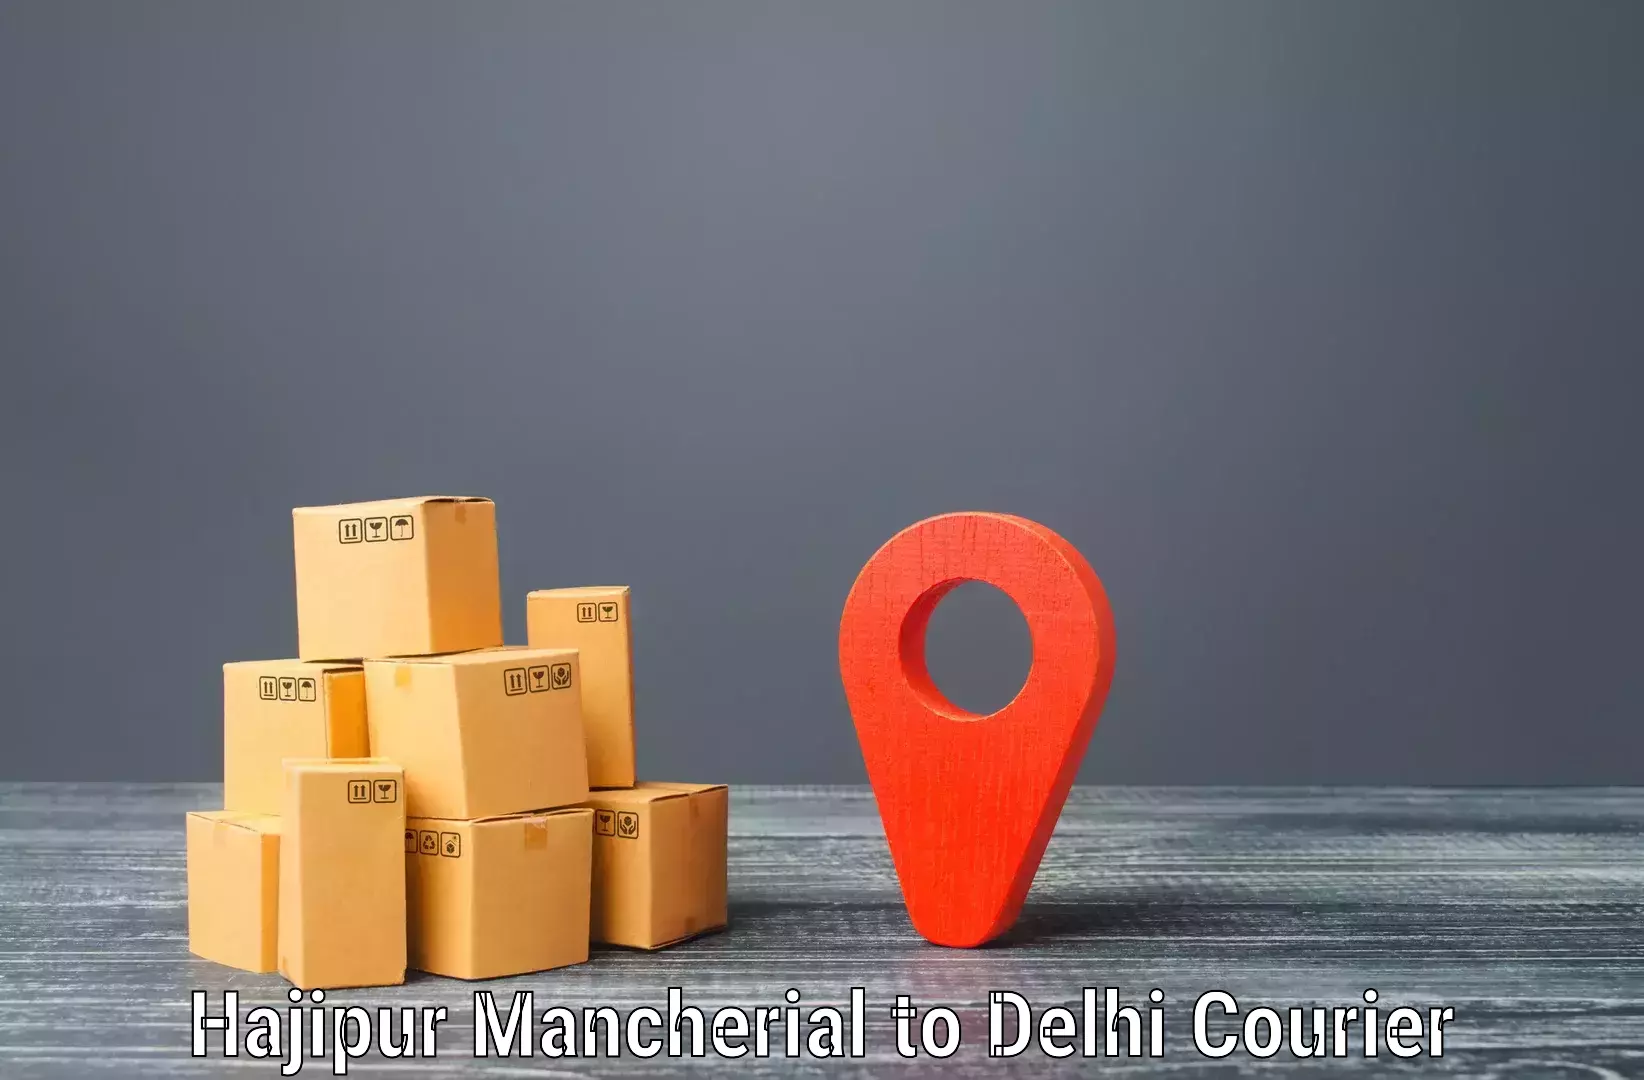 24/7 courier service Hajipur Mancherial to Lodhi Road